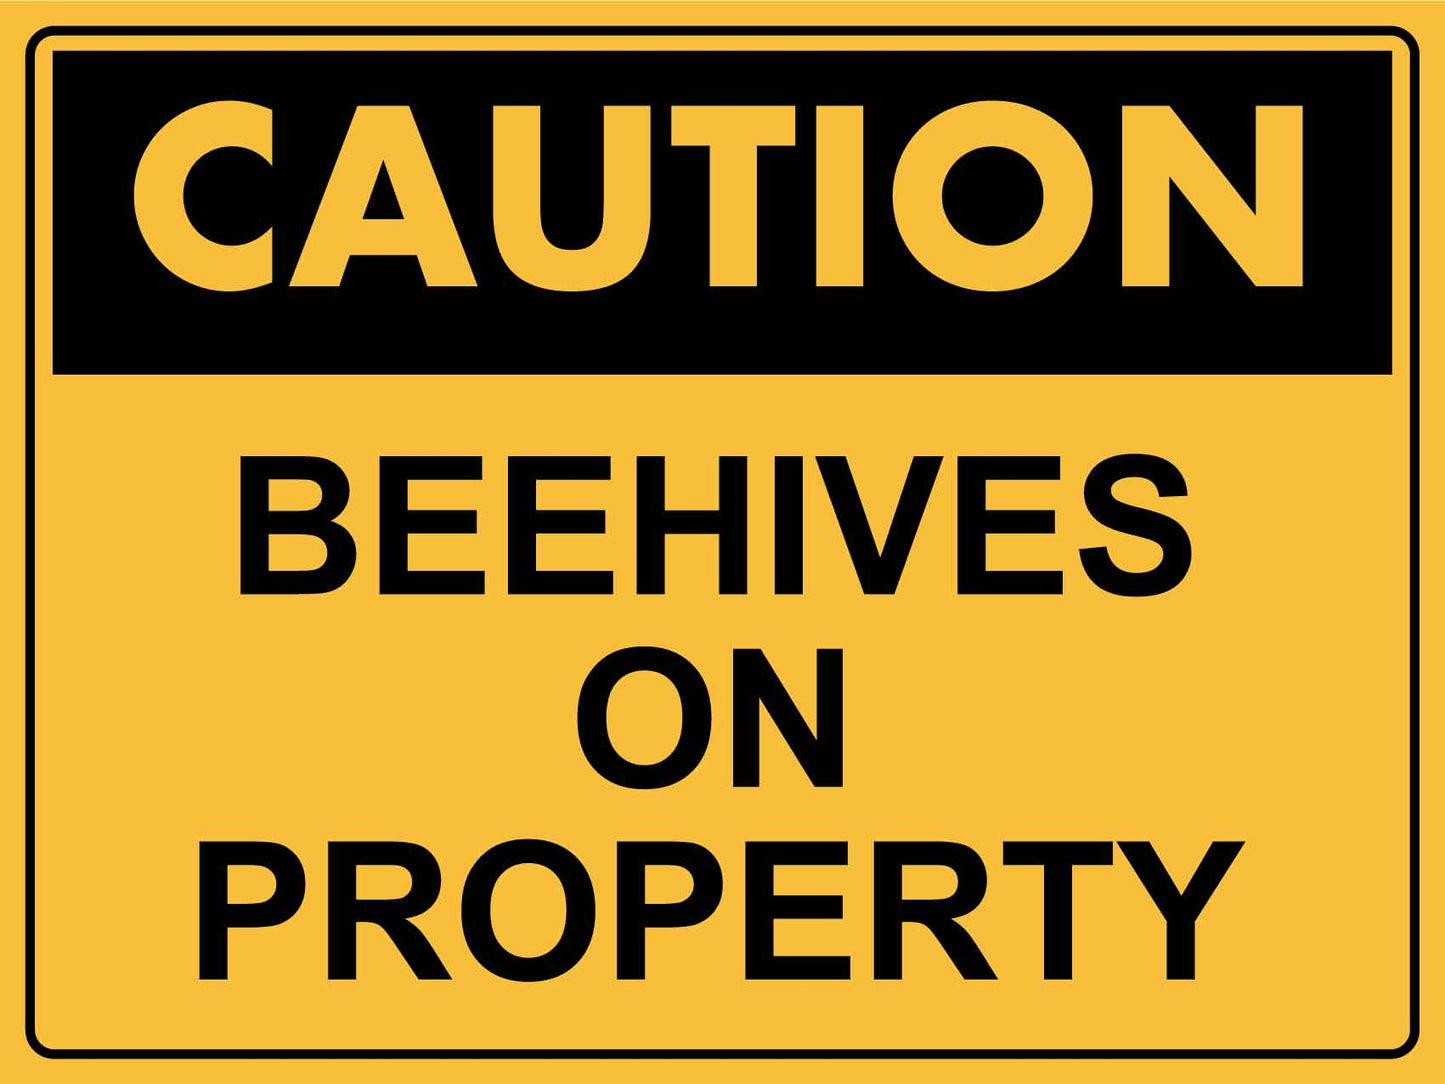 Caution Beehives on Property Sign